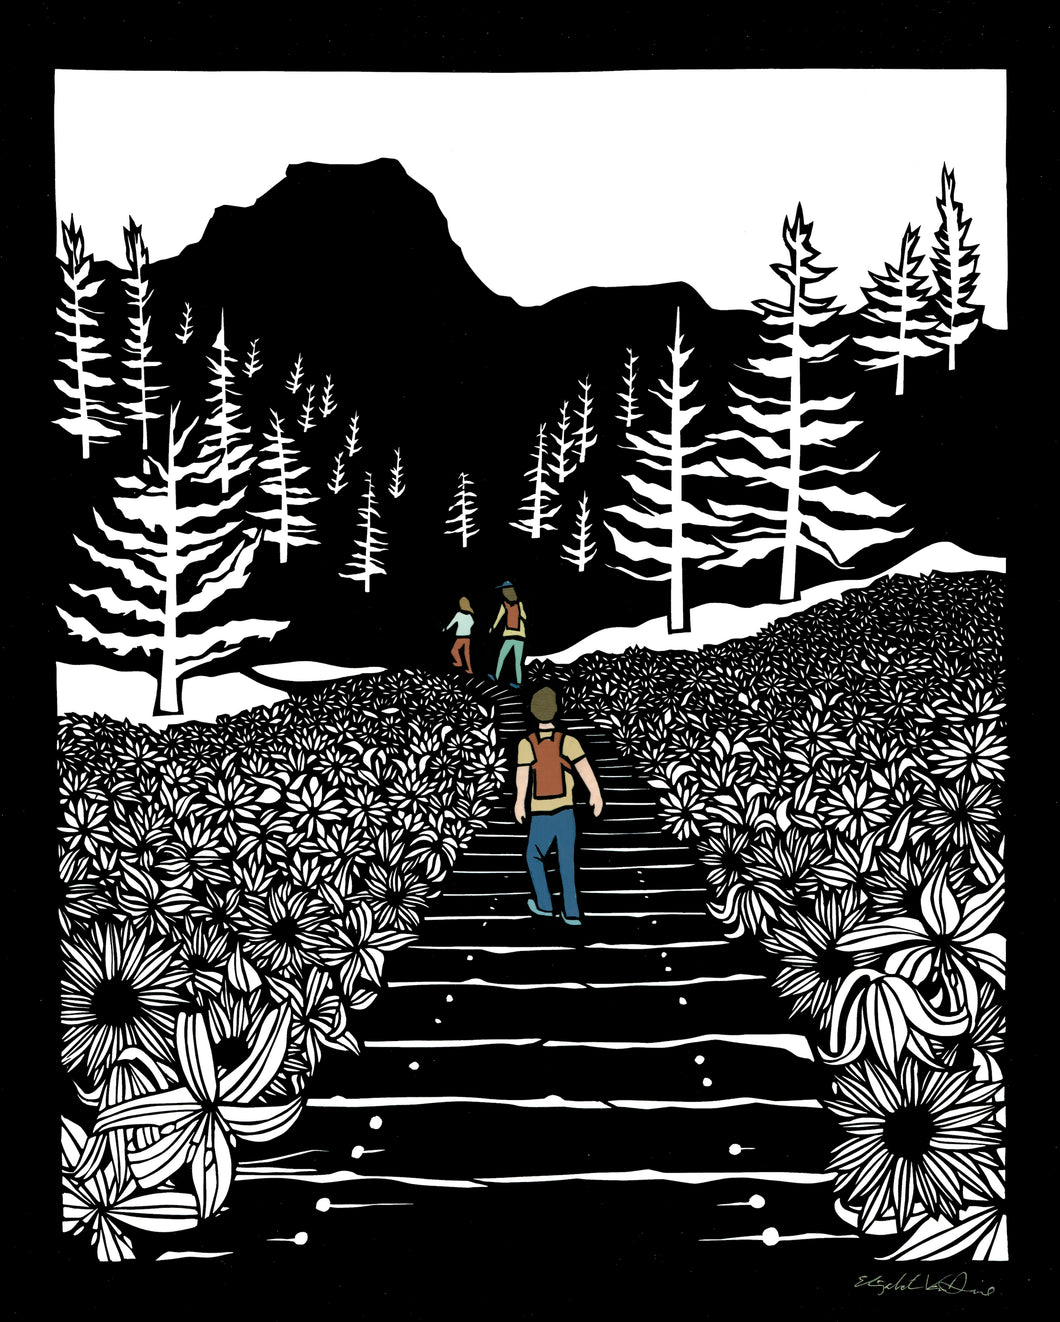 Greeting Card  #19 Happy Place, people hiking trail with mountain, trees and flowers by artist Elizabeth VanDuine